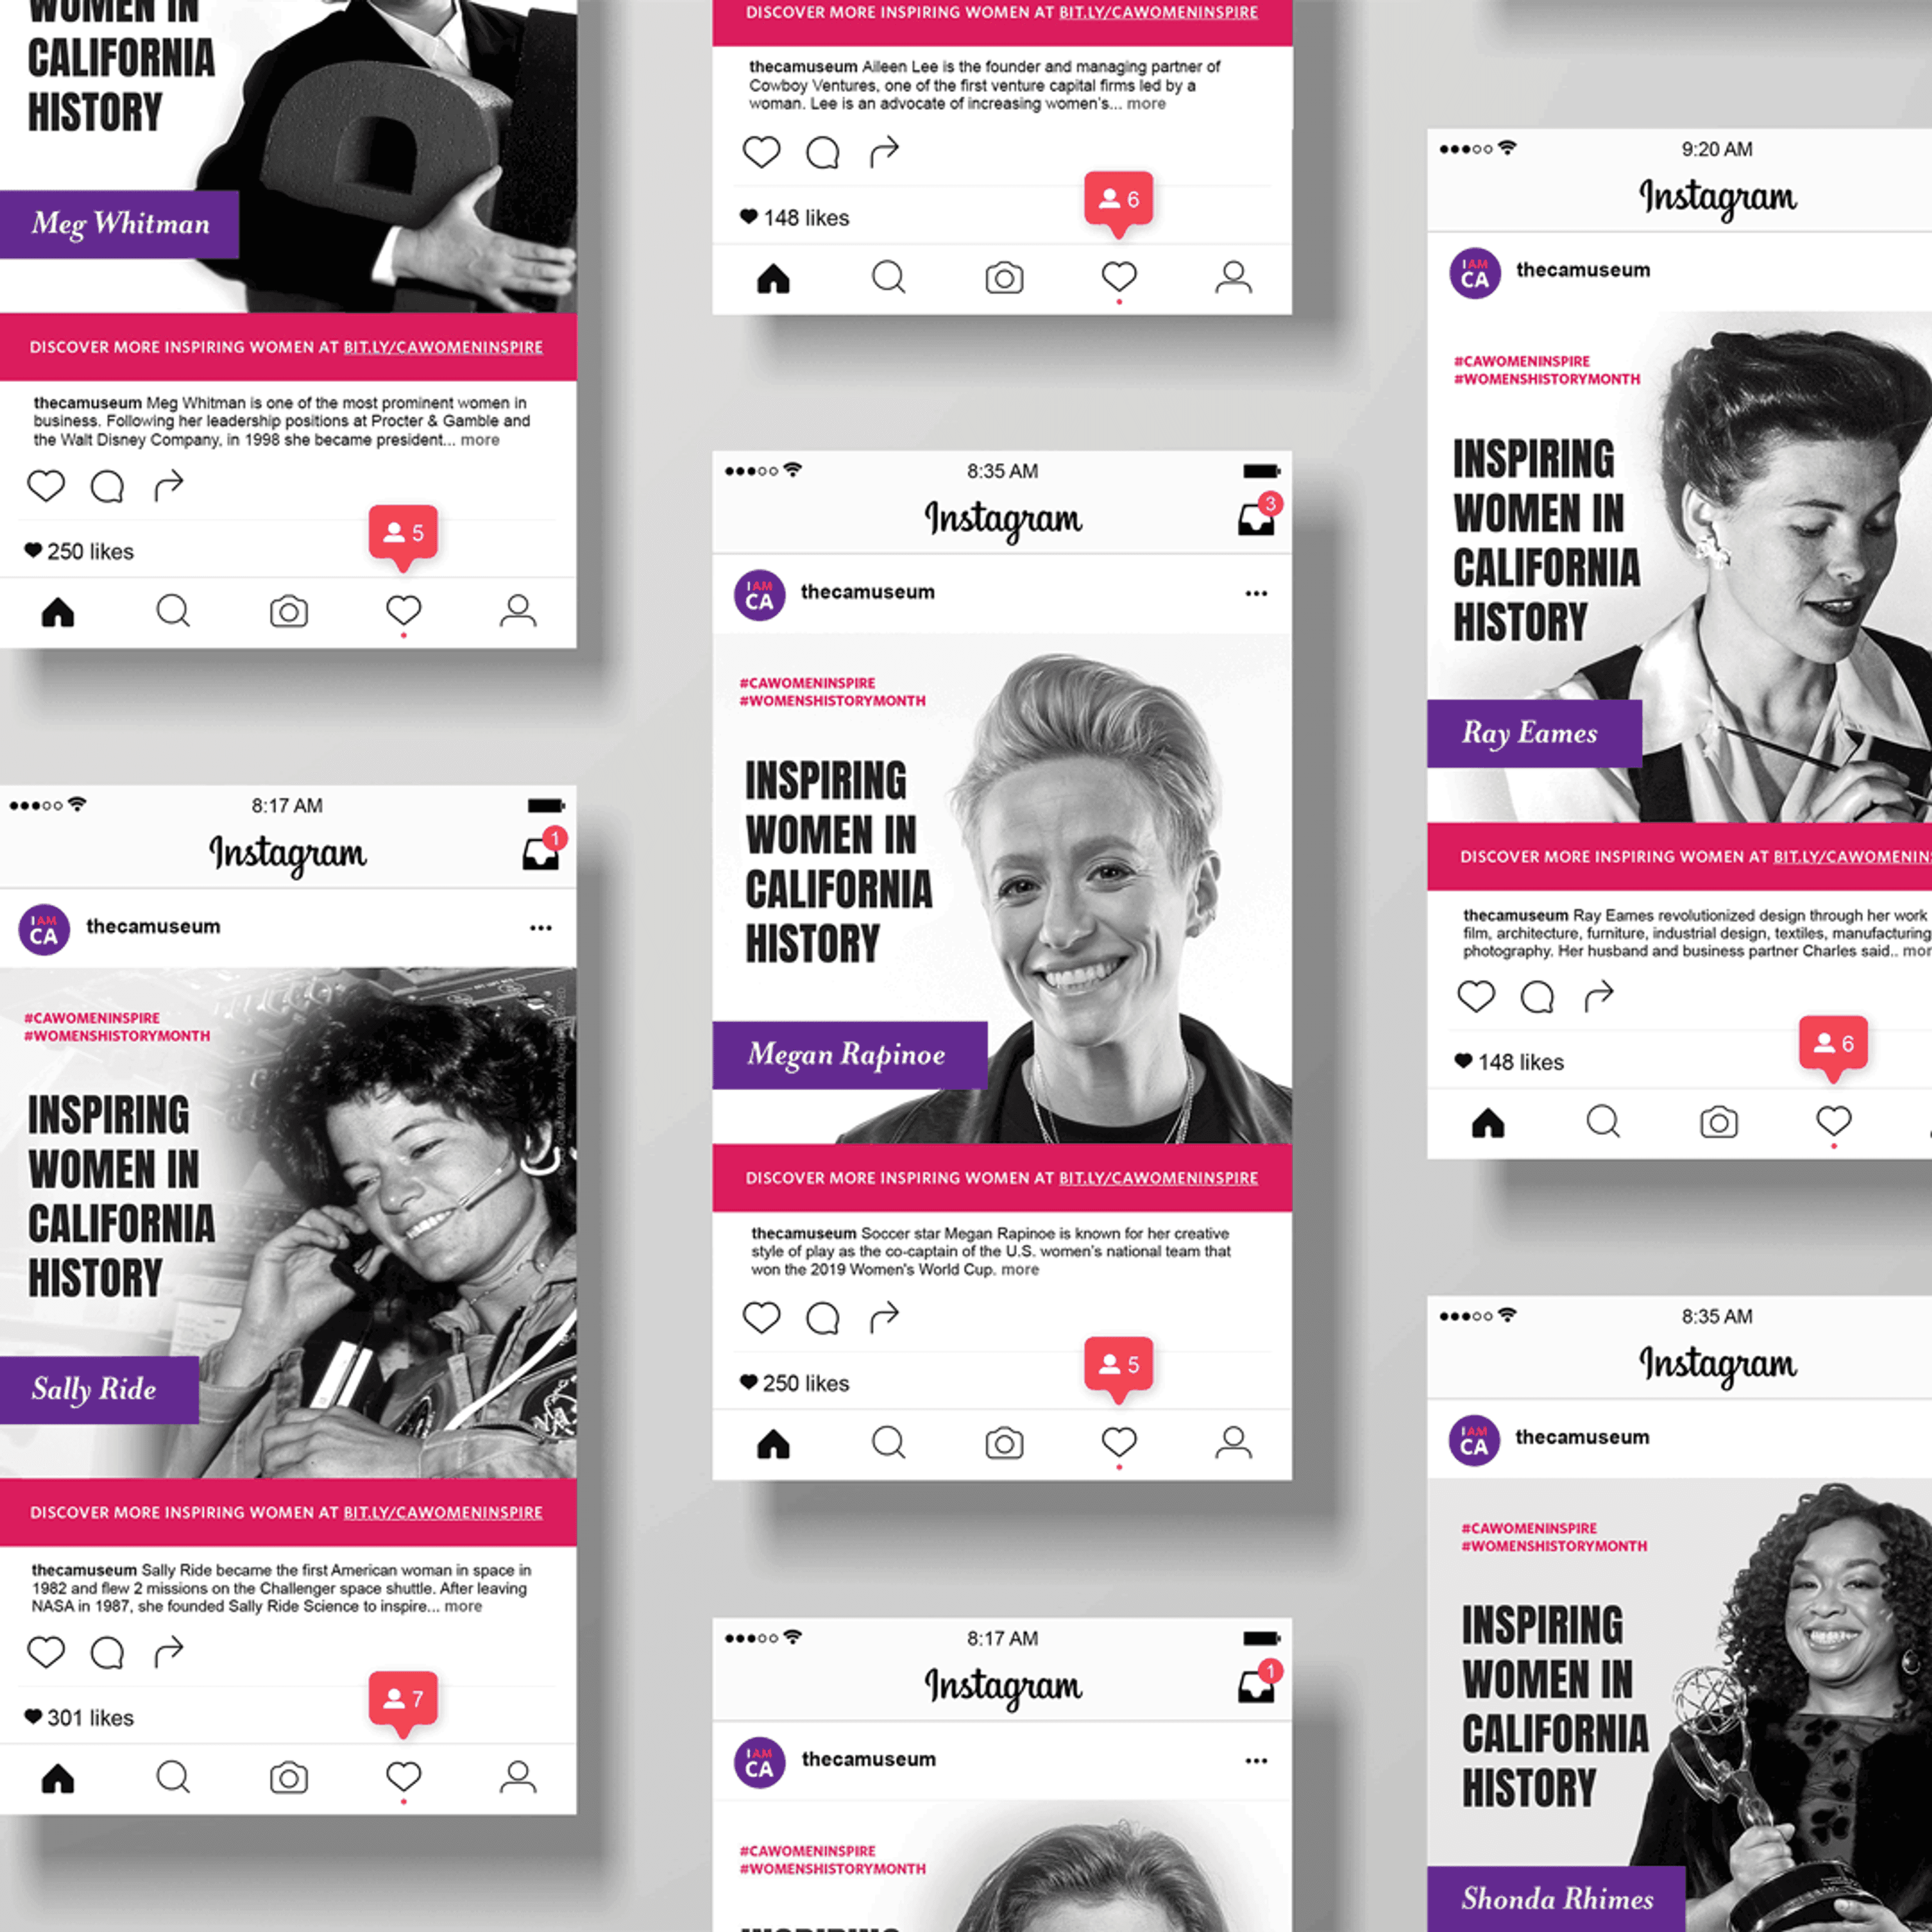 Content creation and social media campaign promoting Women's History Month at the California Museum by Brenna Hamilton.